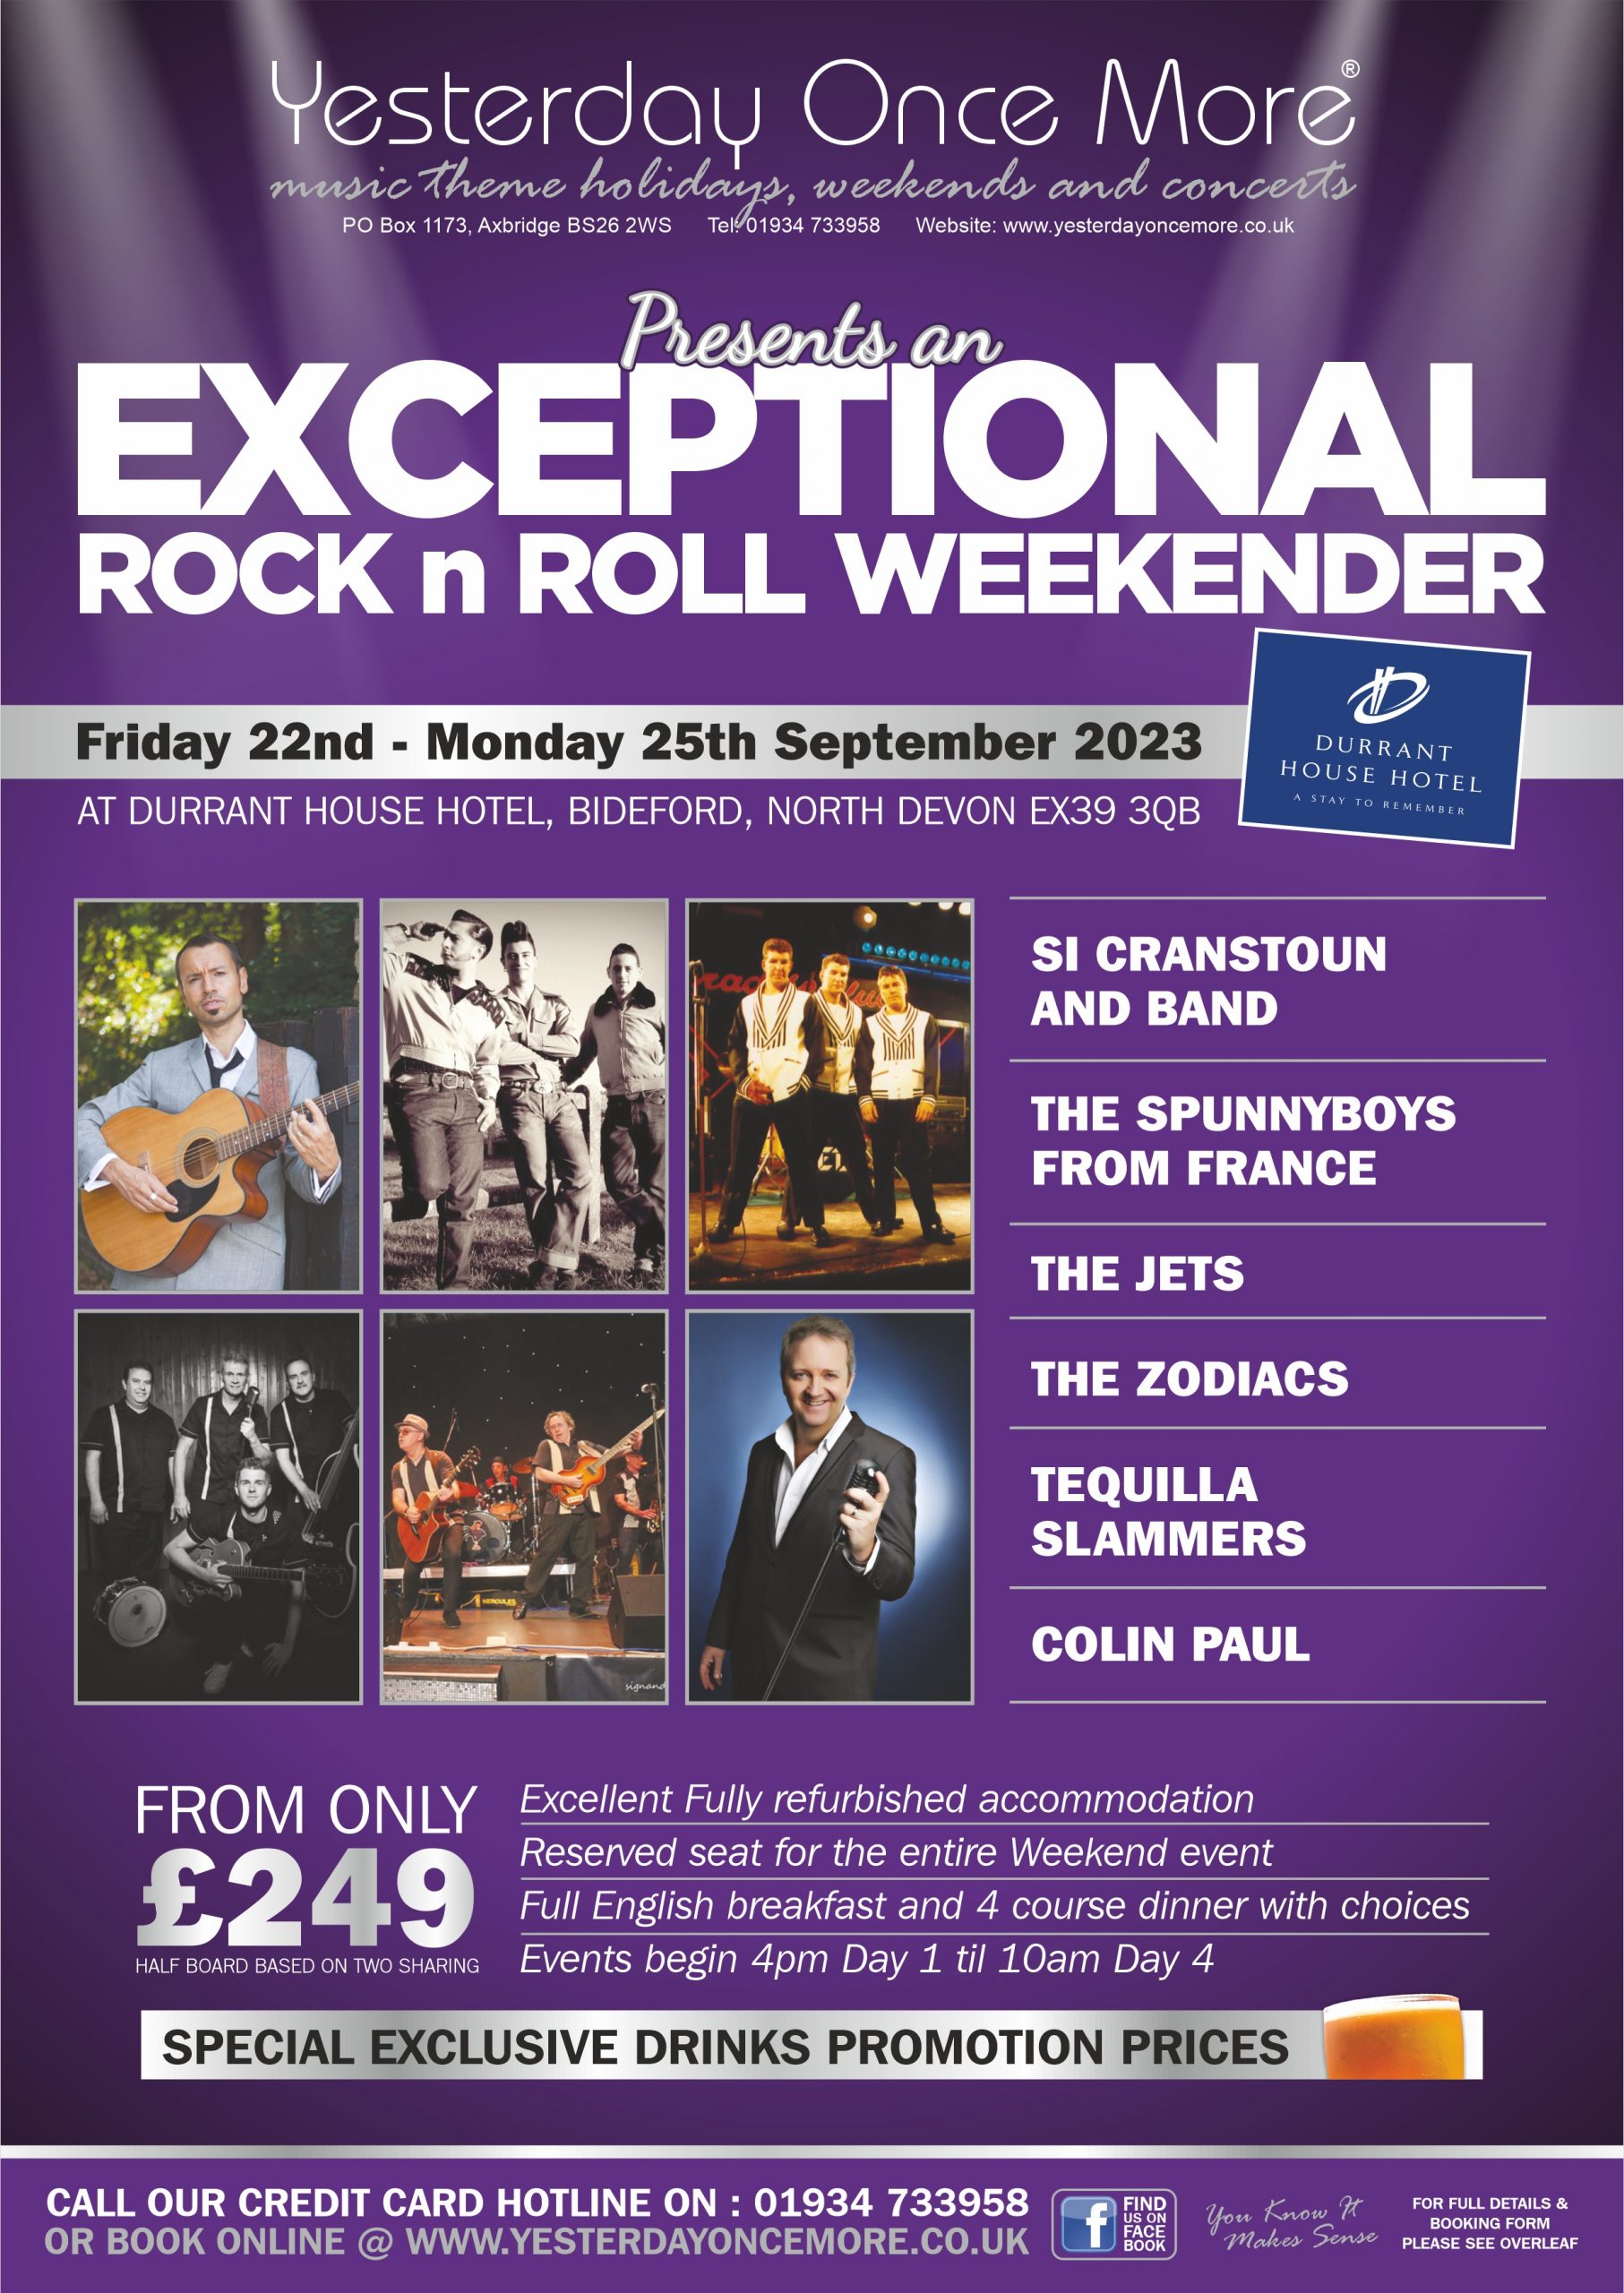 Exceptional Rock n Roll Weekender at the durrant house hotel